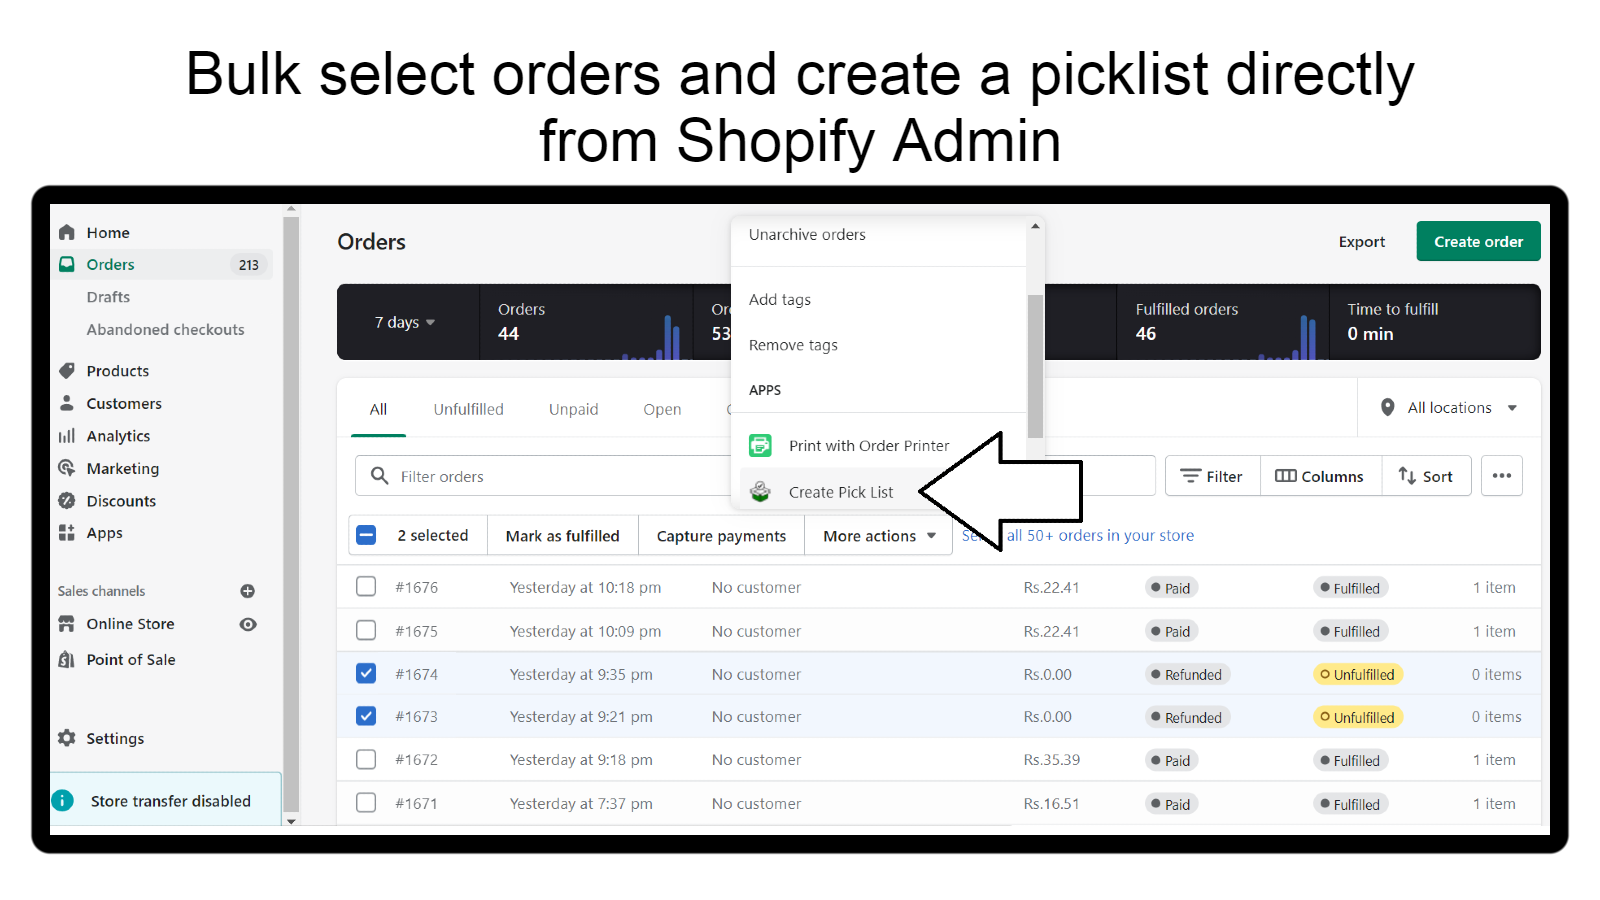 Select orders from Shopify Admin